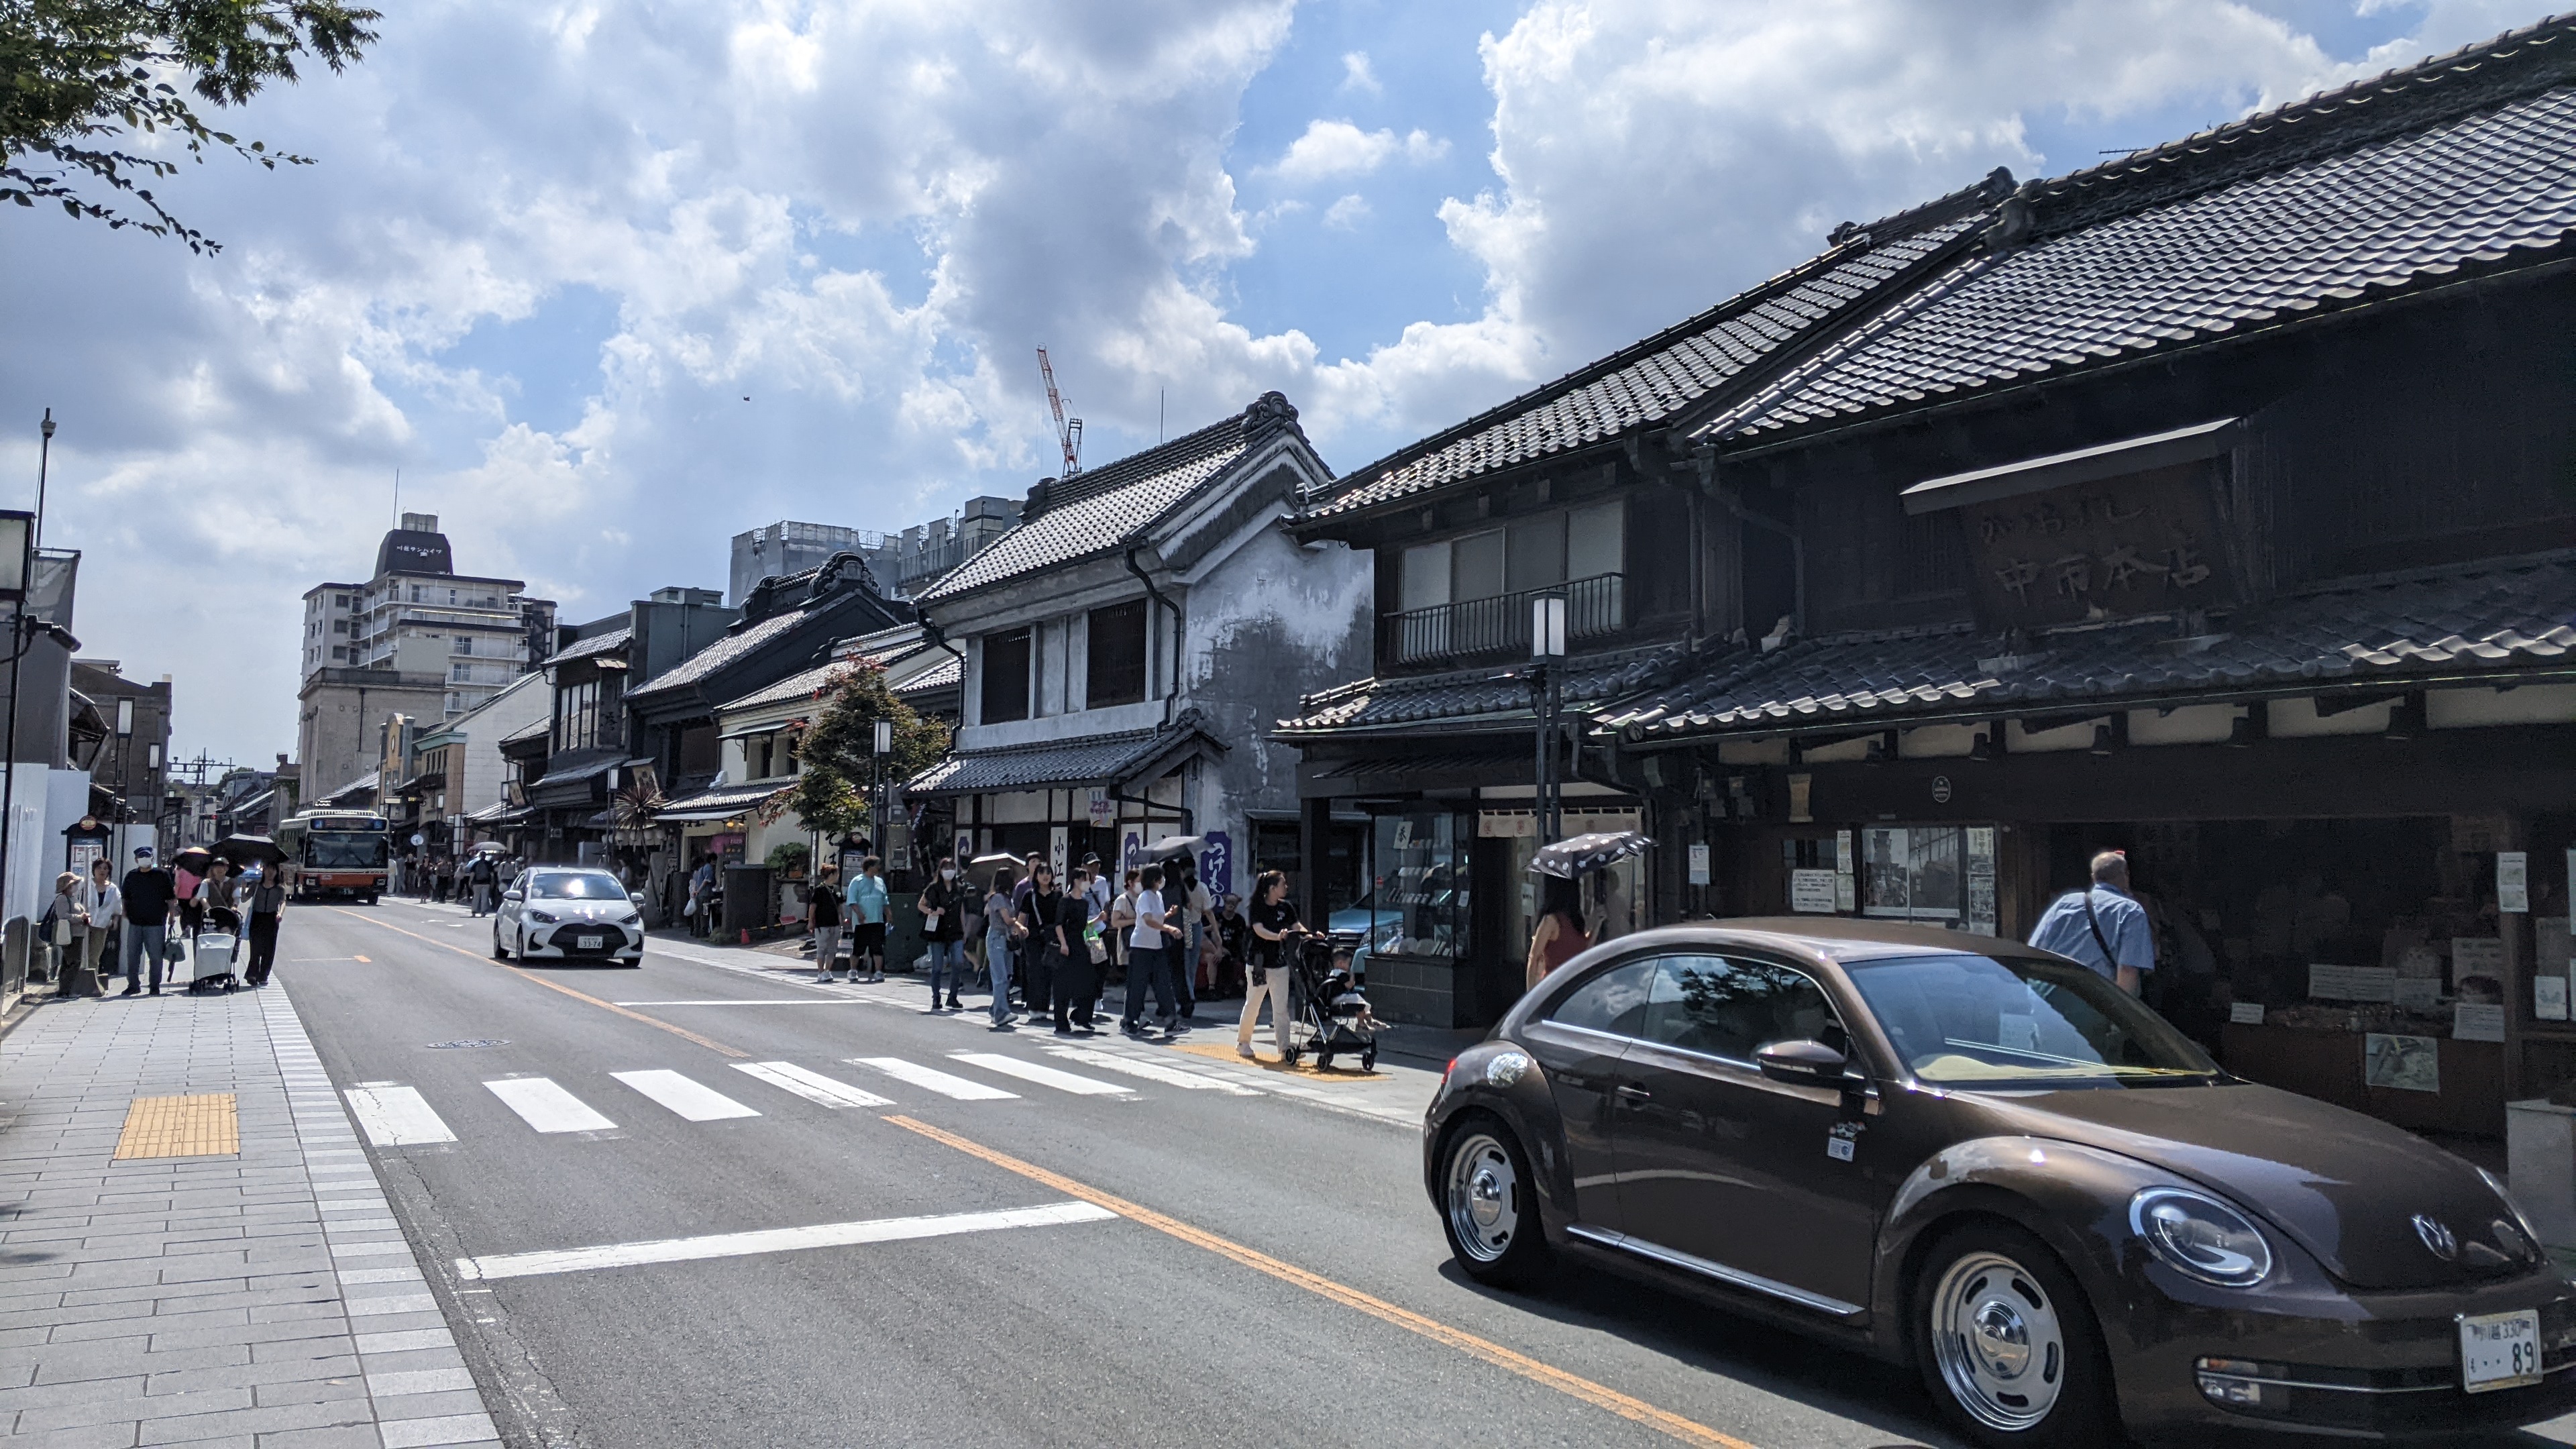 traditional japanese shops along the street